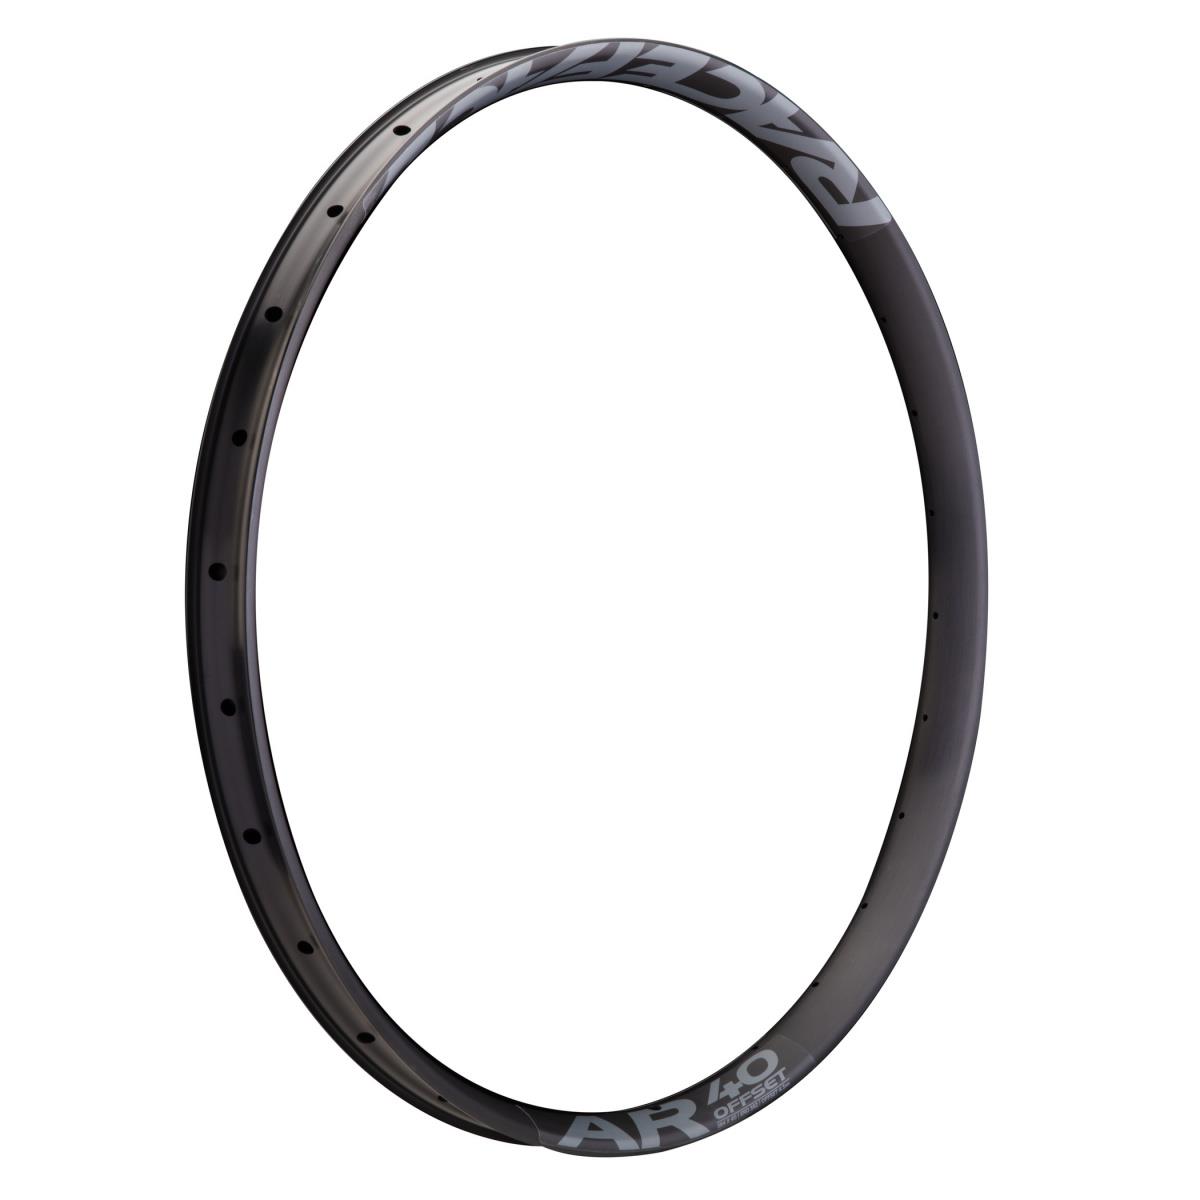 Race Face Jante MTB Ar Offset 40 Black/Grey, 29 Inches x 40 mm